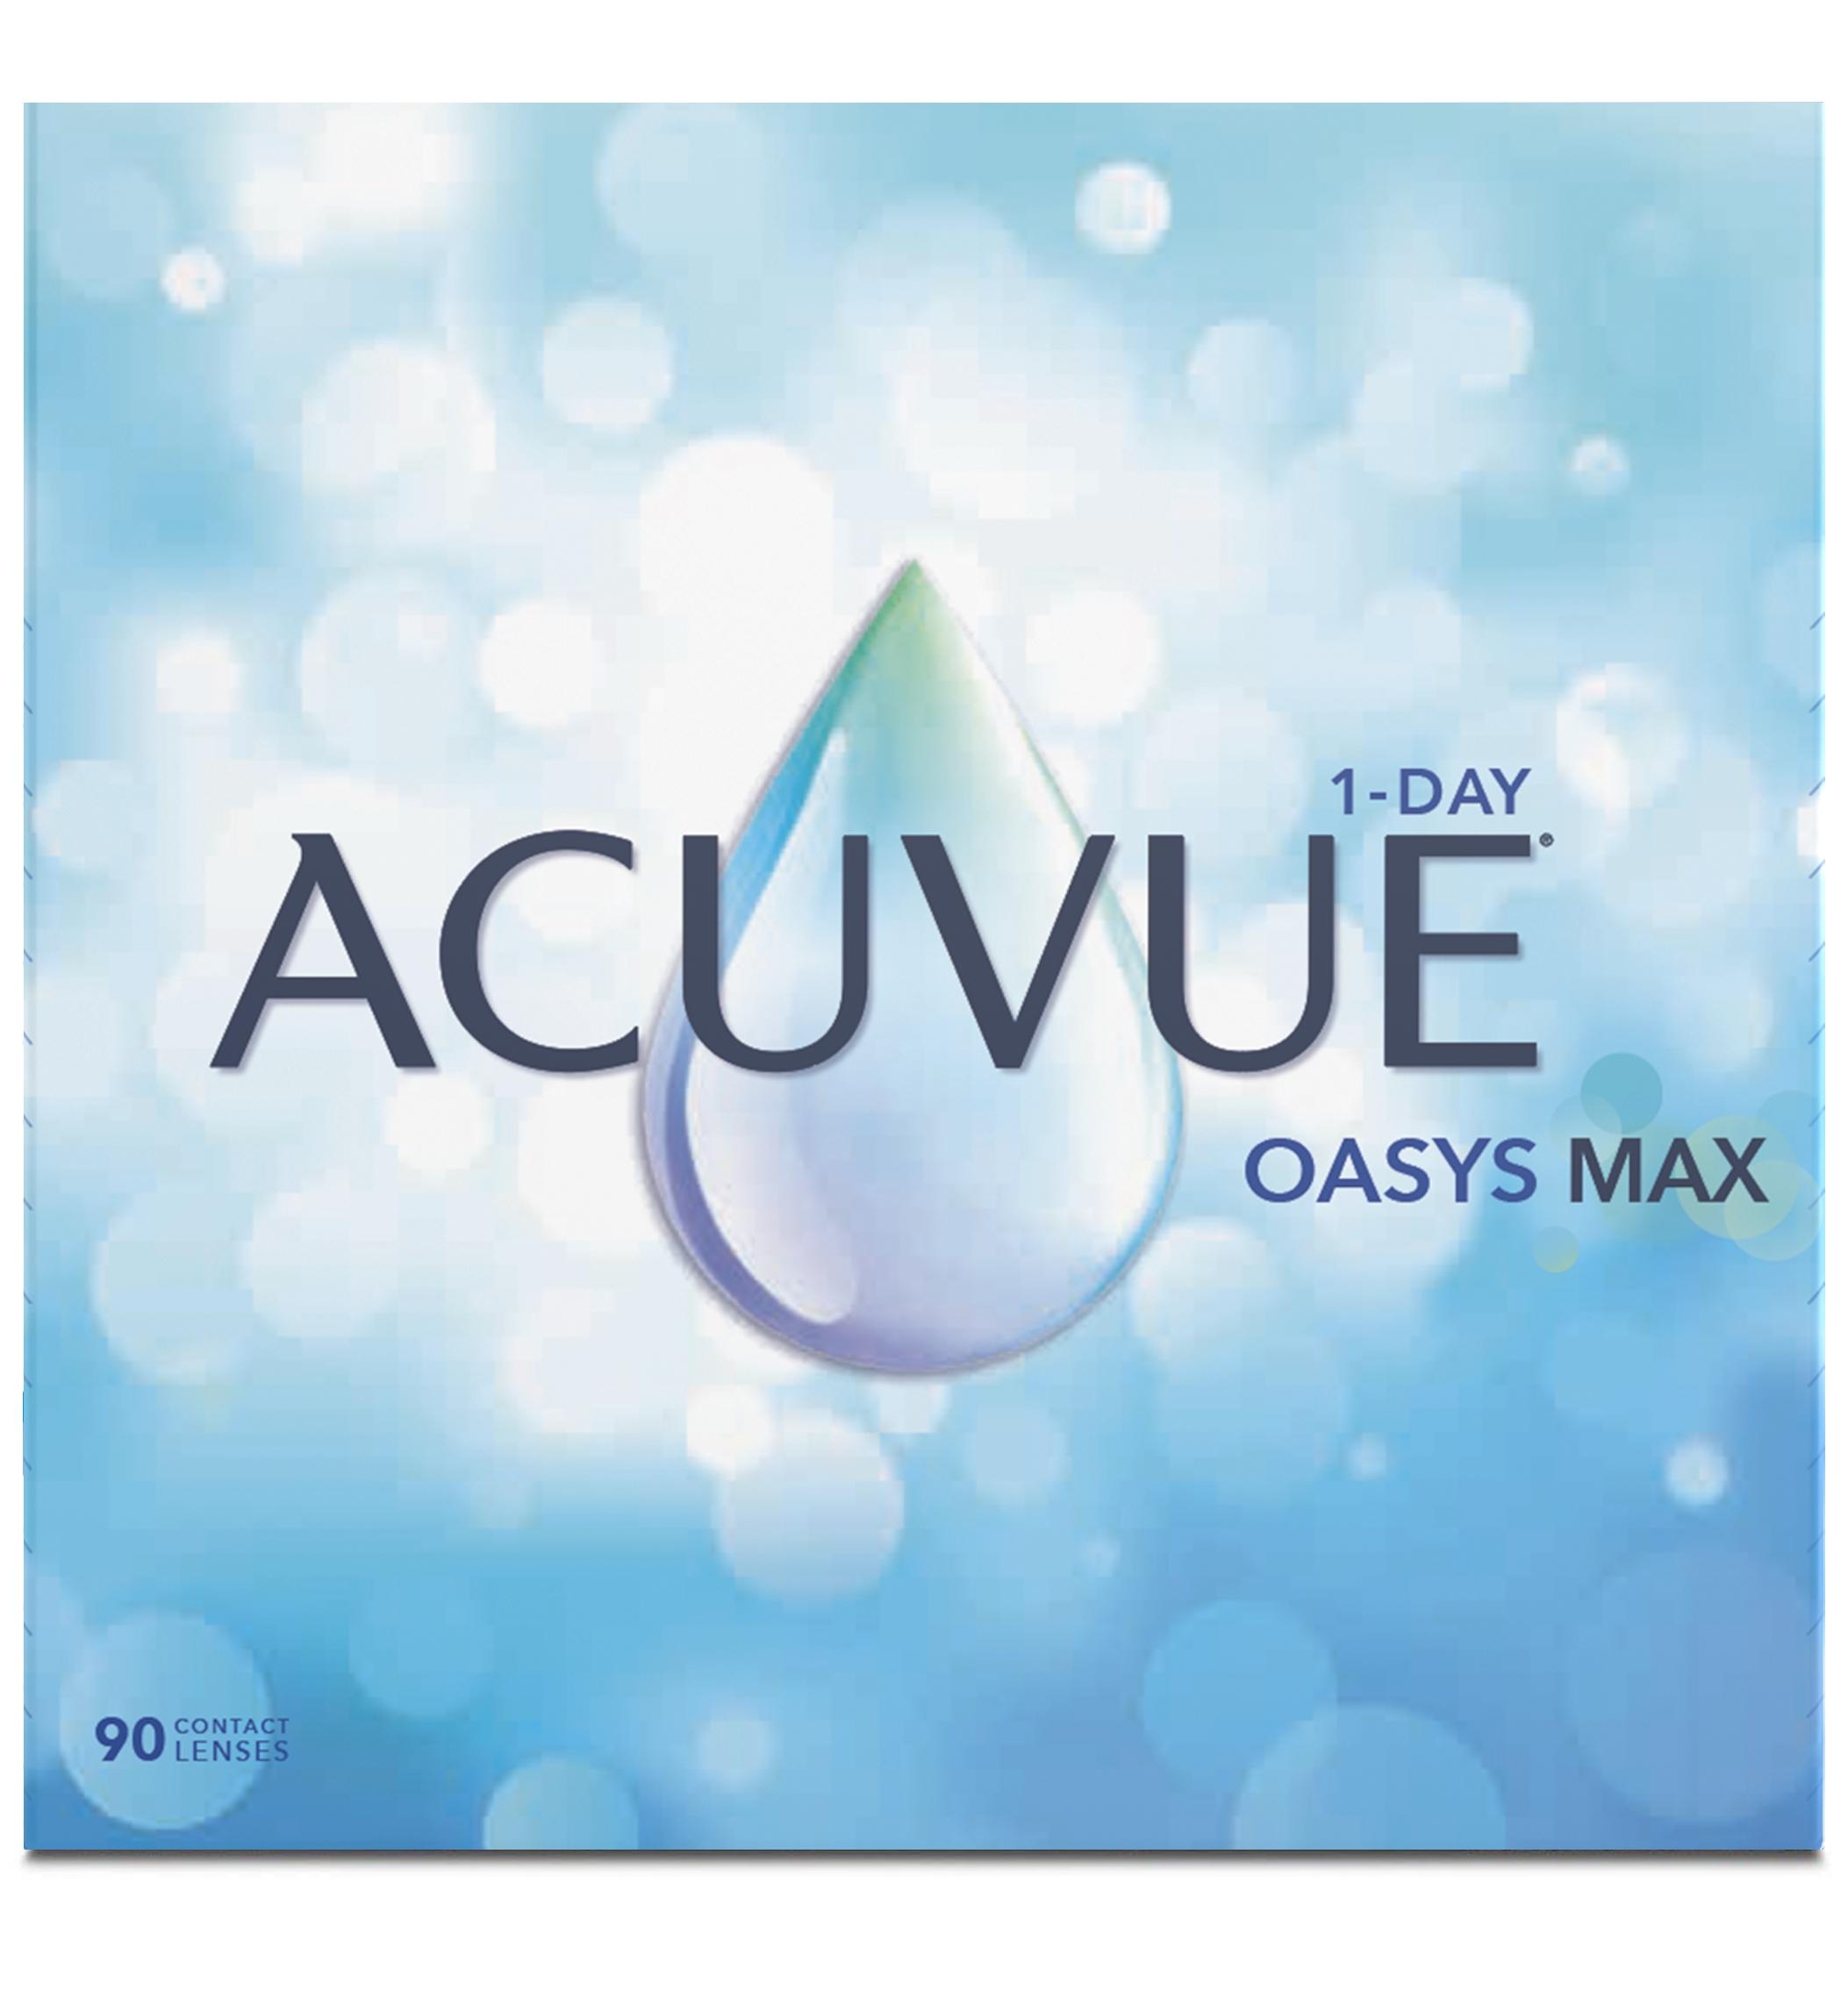  NEU: Acuvue Oasys Max 1-Day 